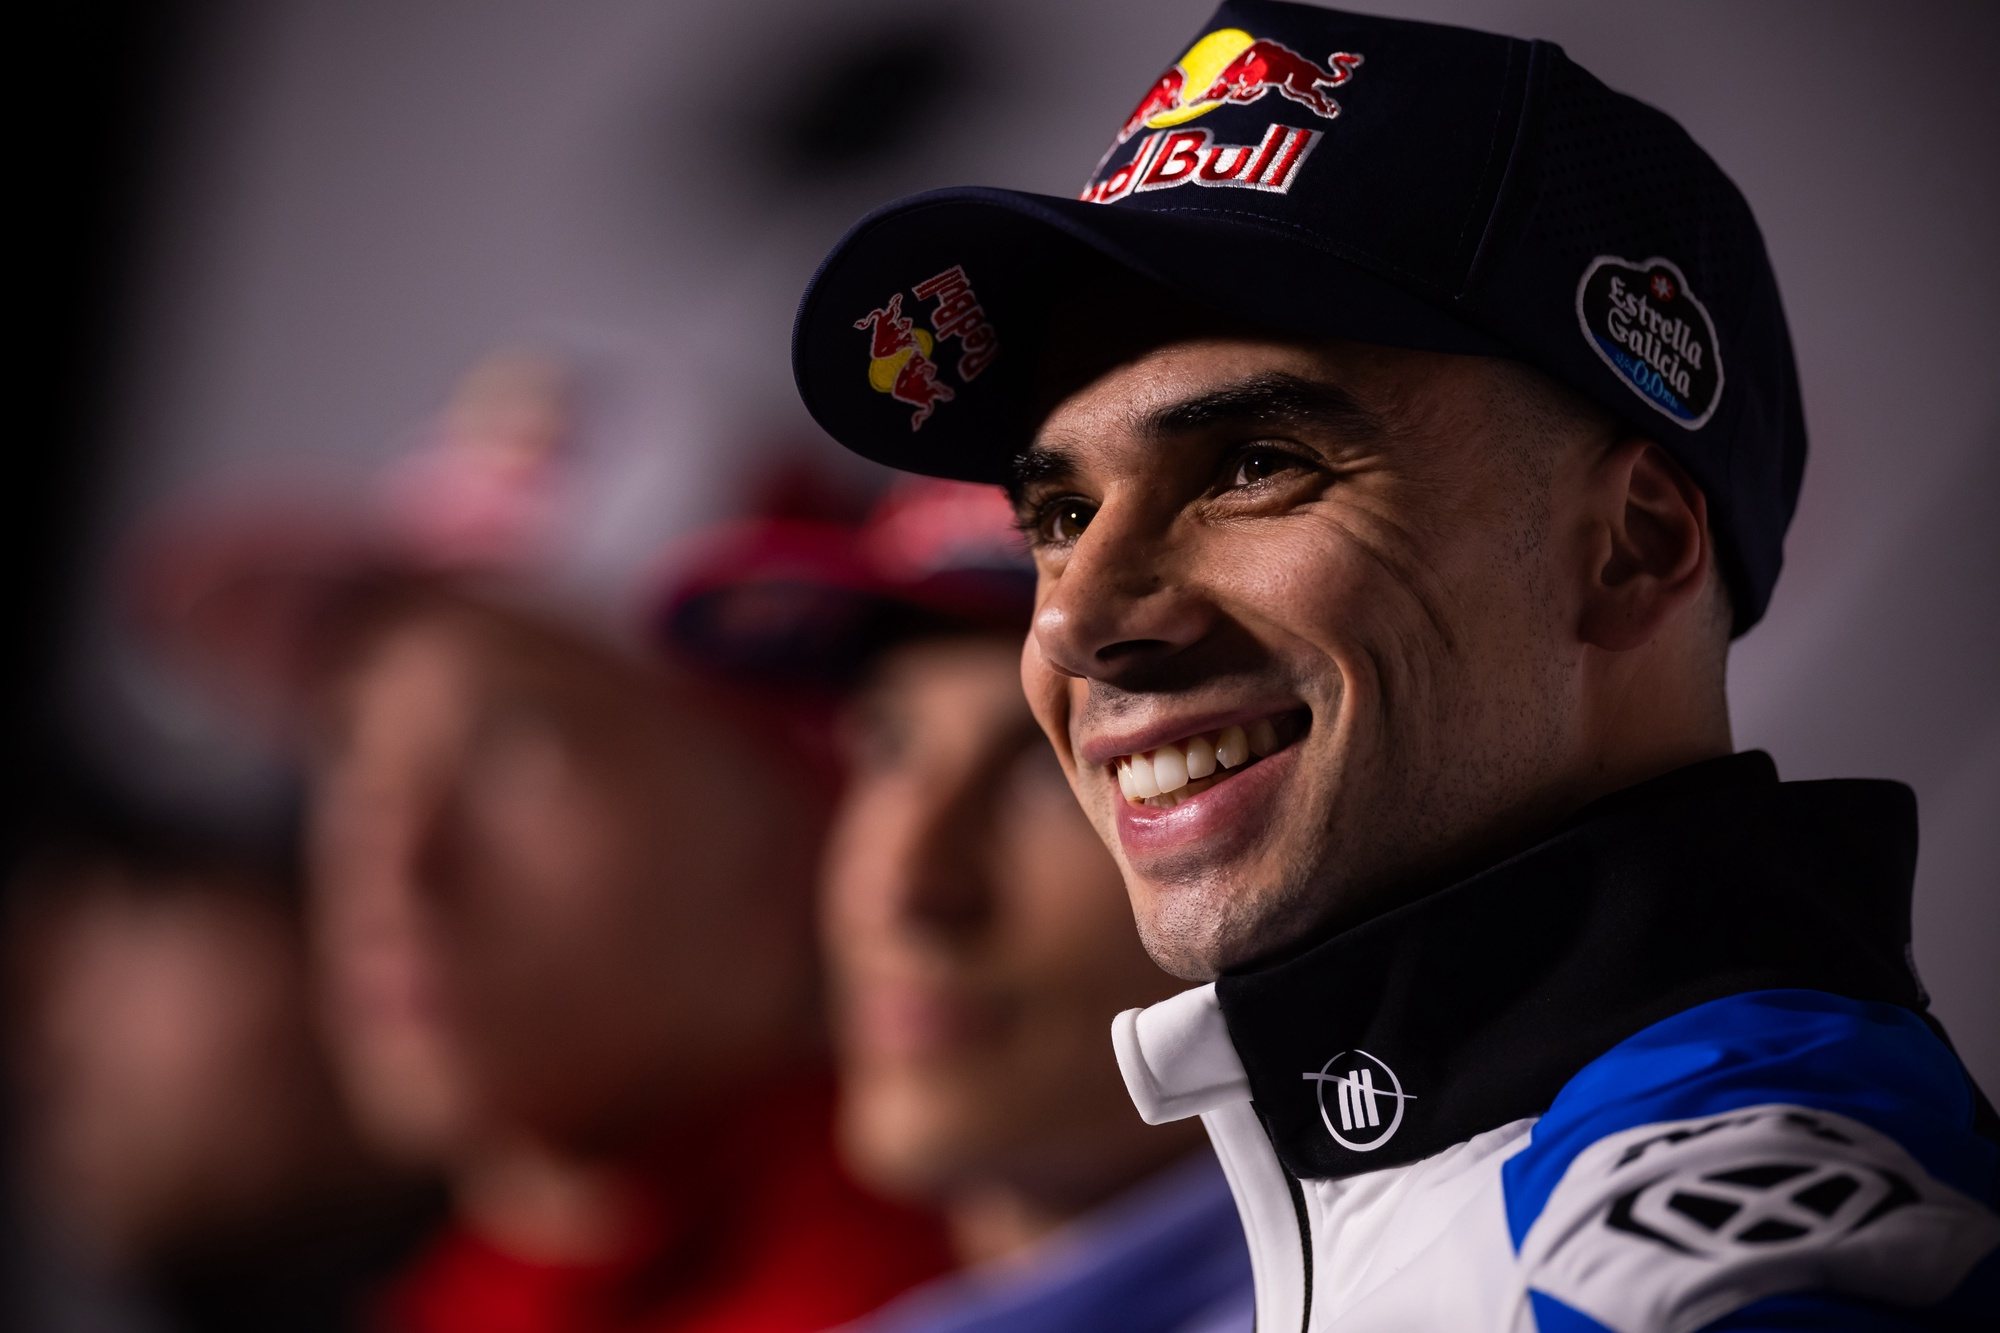 Moto GP portuguese rider Miguel Oliveira of Trackhouse Racing team attends a press conference ahead of the Moto GP Grand Prix of Portugal that will take place from March 22 to March 24, at Autodromo Internacional do Algarve, Portimao, south of Portugal, 21 March 2024. JOSE SENA GOULAO/LUSA